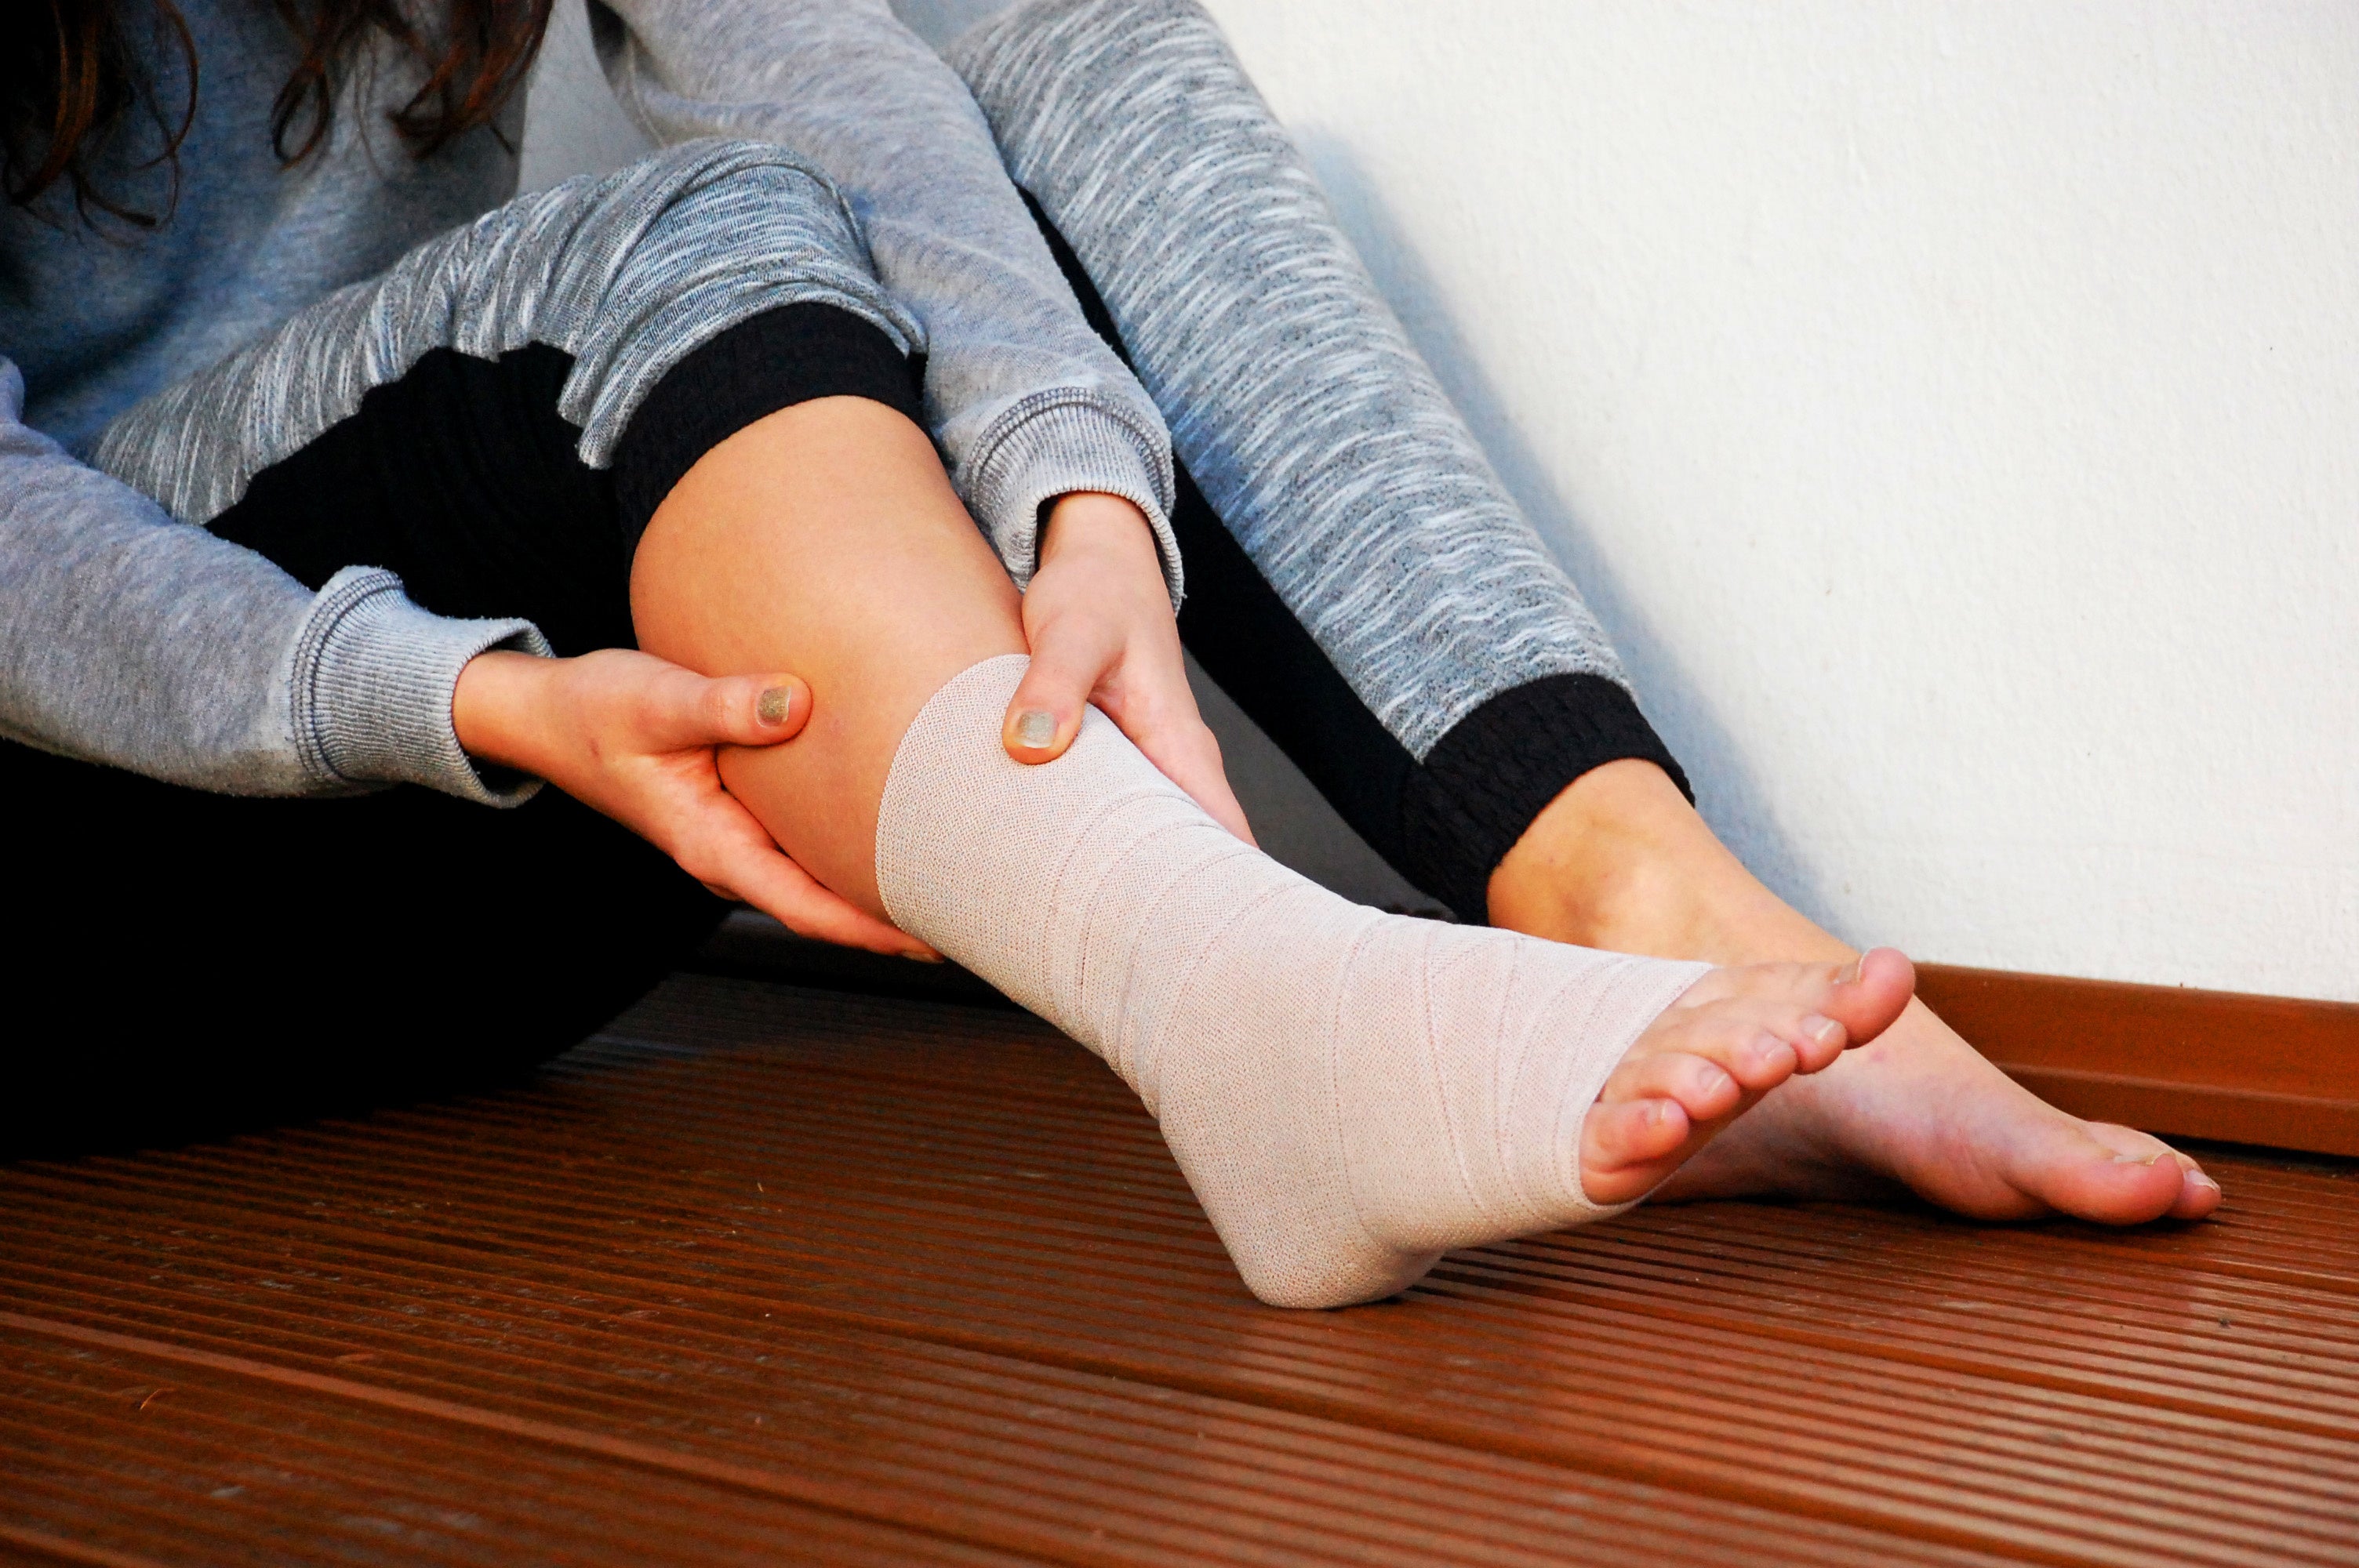 Ankle bandage after injury: torn ligament, healing time